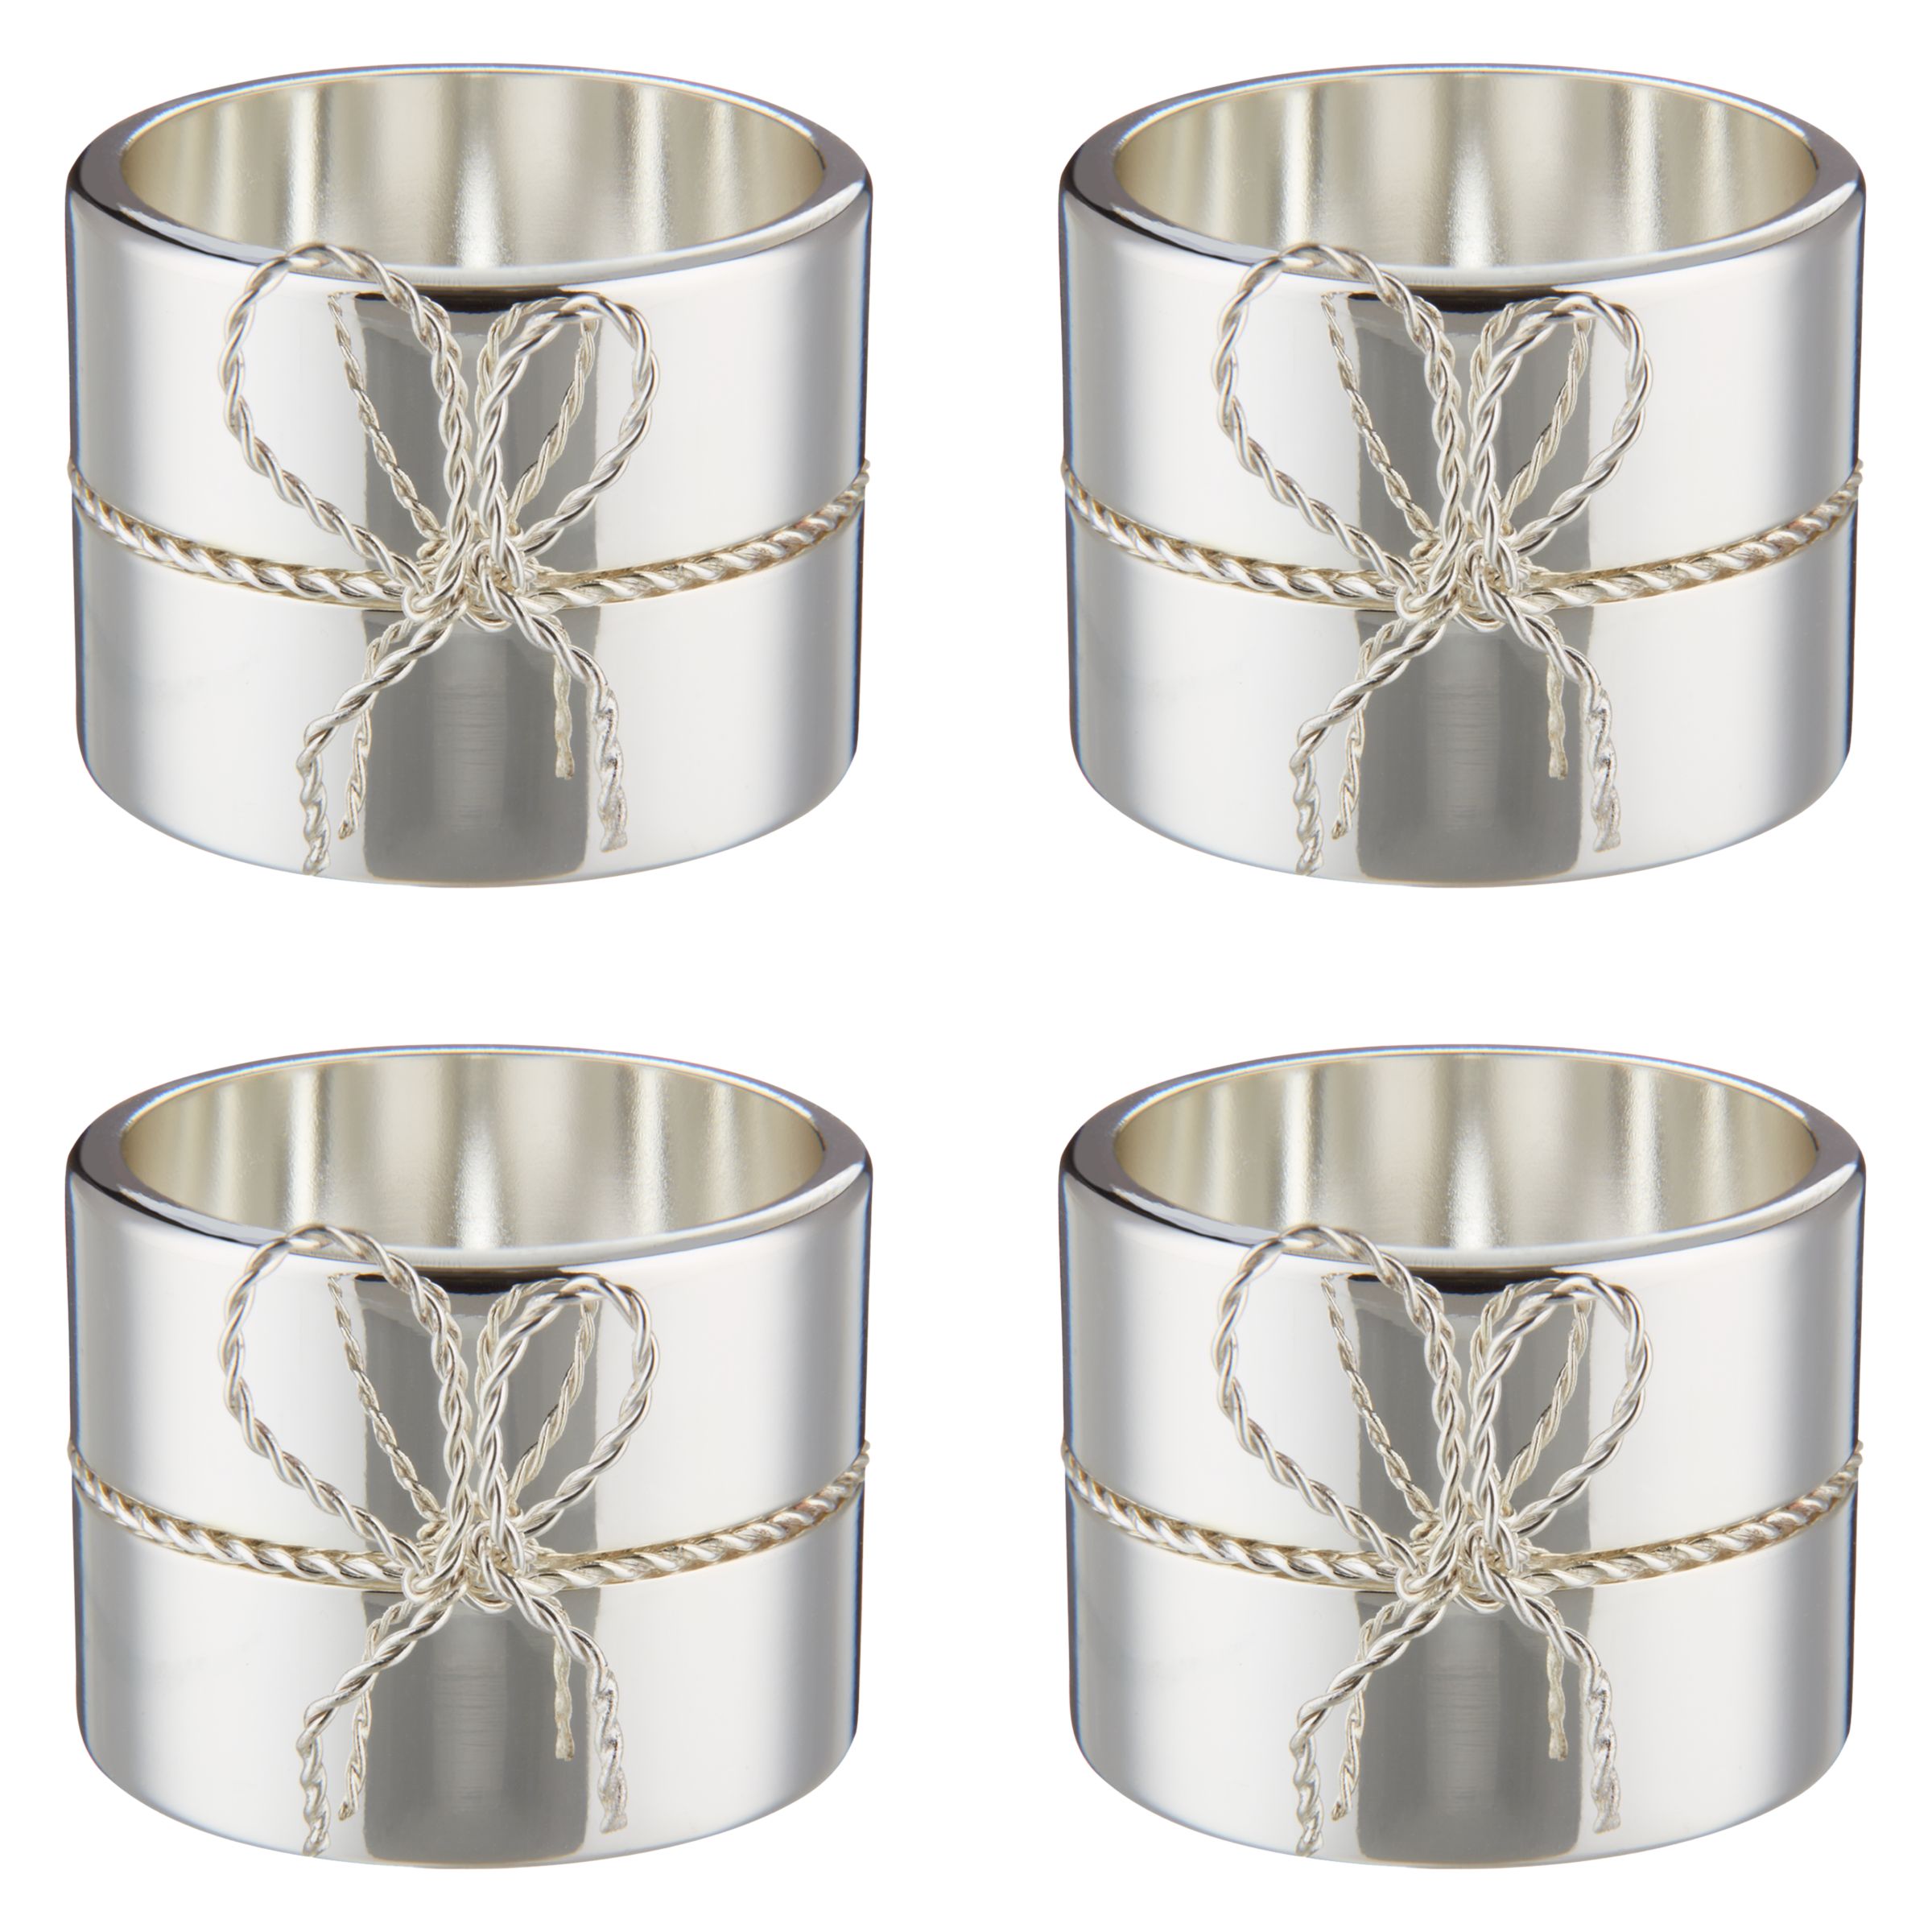 by Wedgwood Love Knots Napkin Rings,